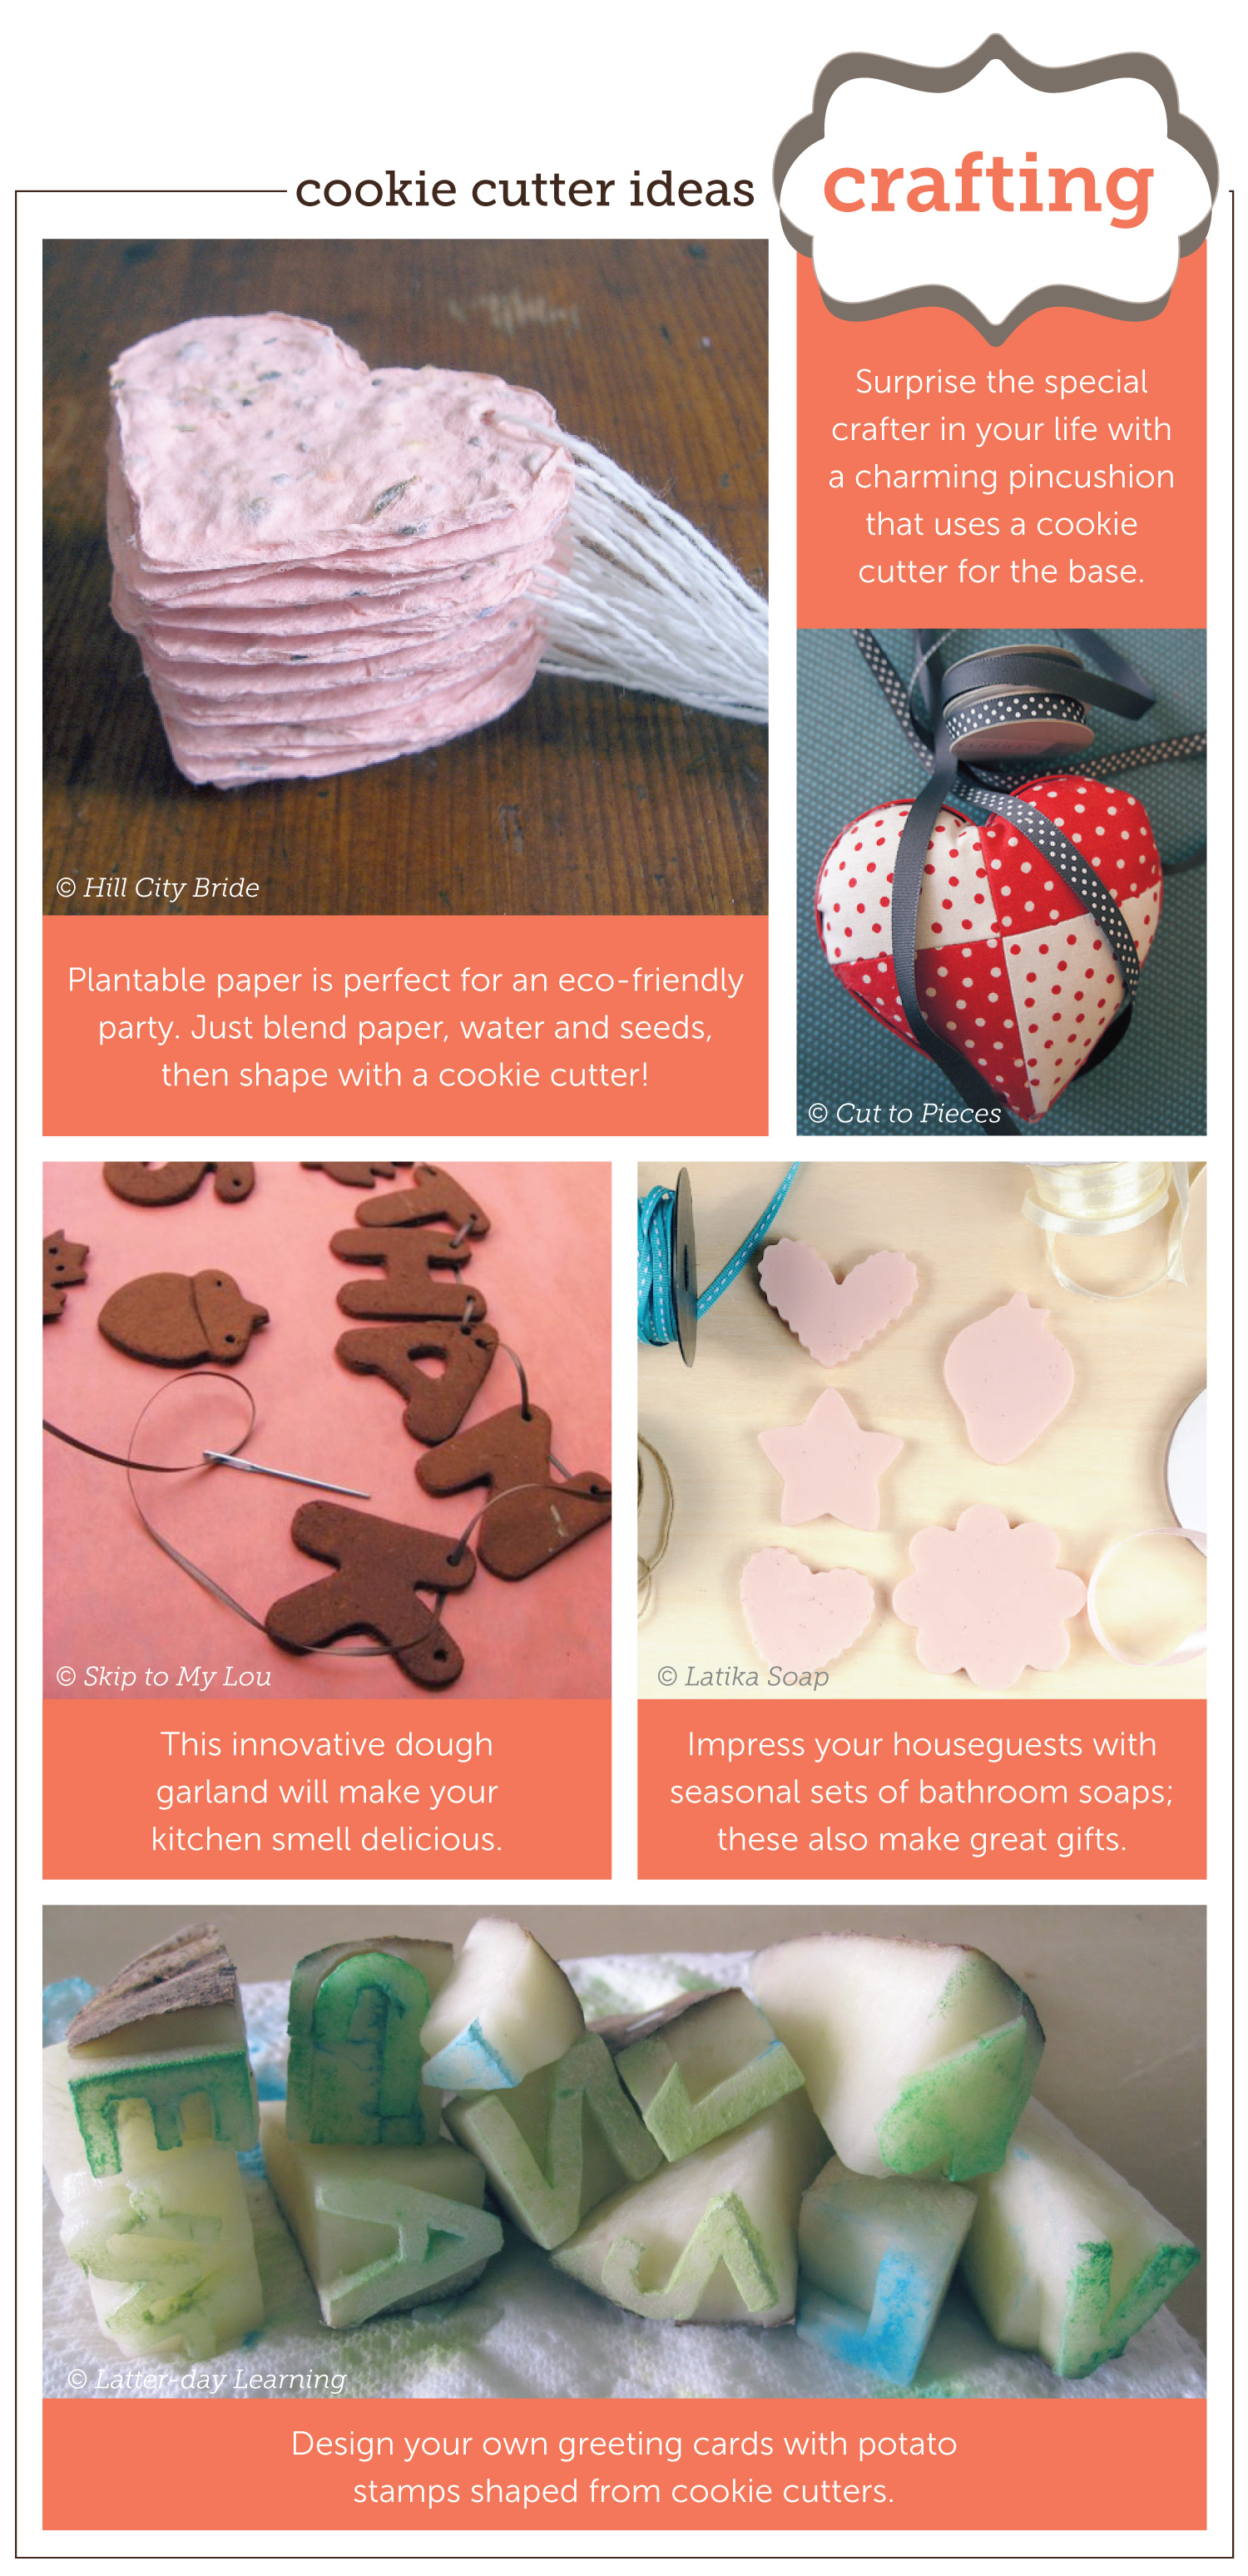 Cookie Crafter Make Amazing Cookie Shapes